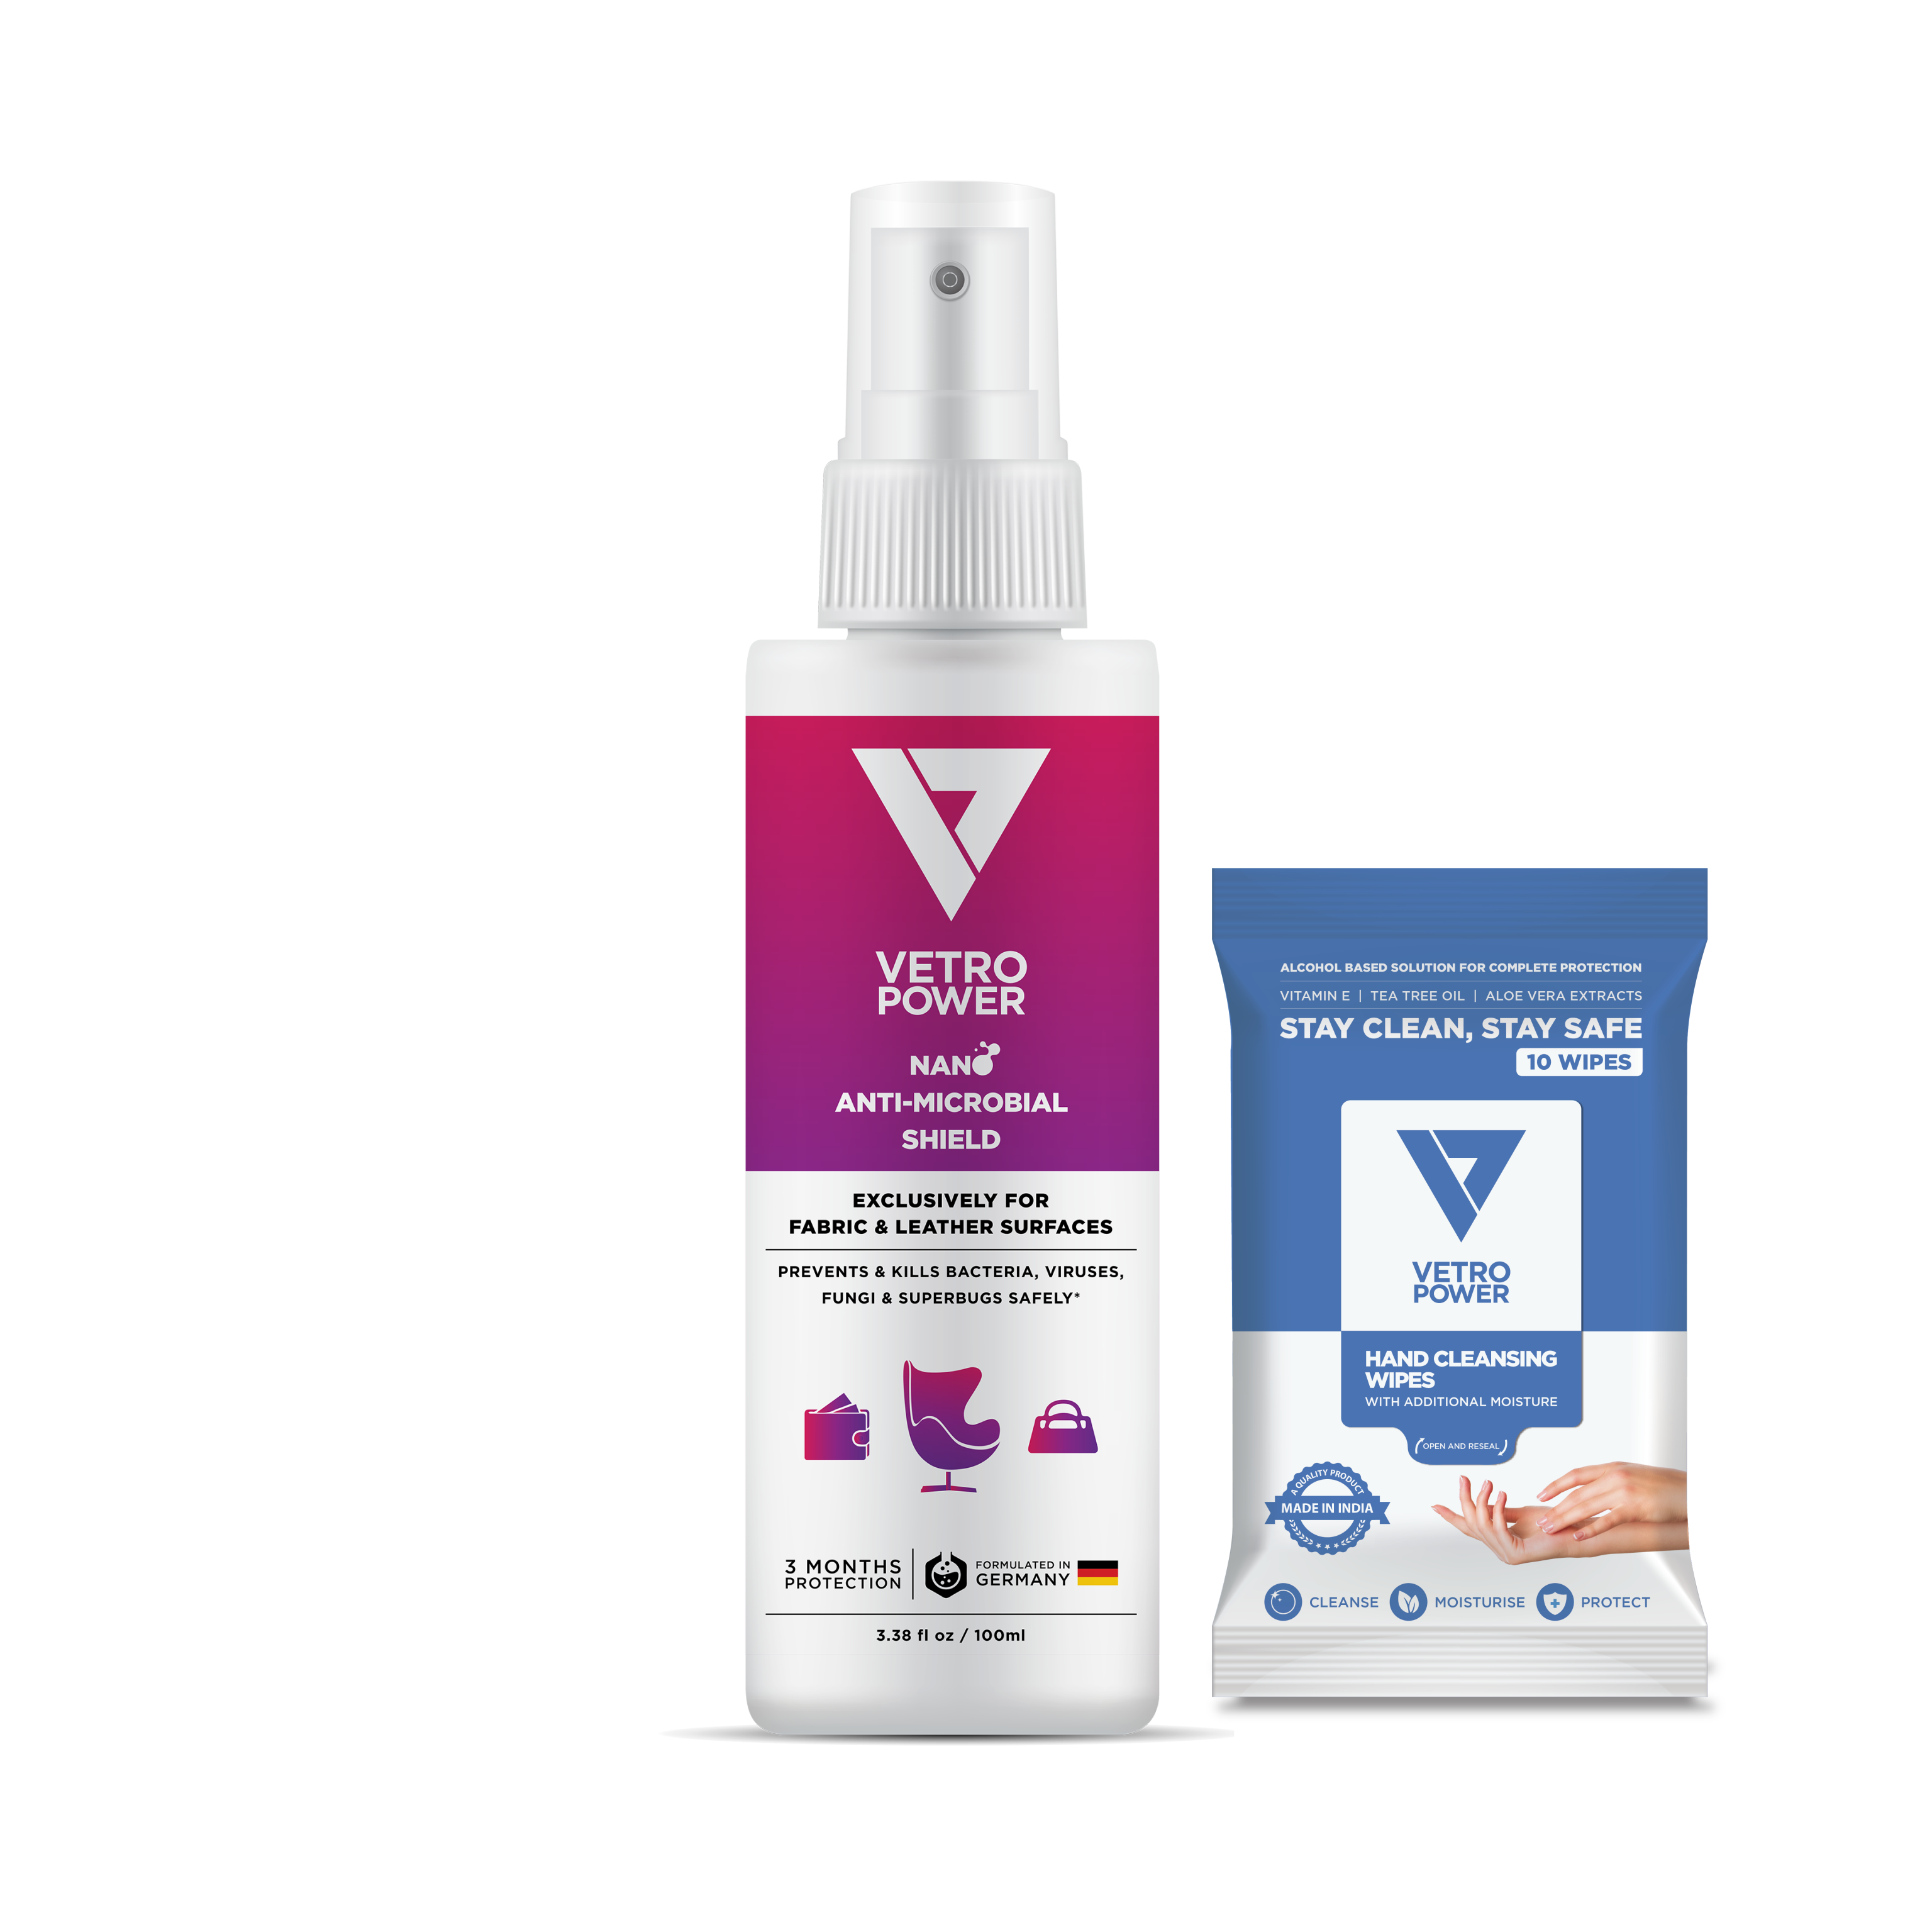 Vetro Power Nano Anti-Microbial Shield for Fabric & Leather Surfaces 100ml - Buy 1 Get 1 Hand Wipes (pack of 10) FREE